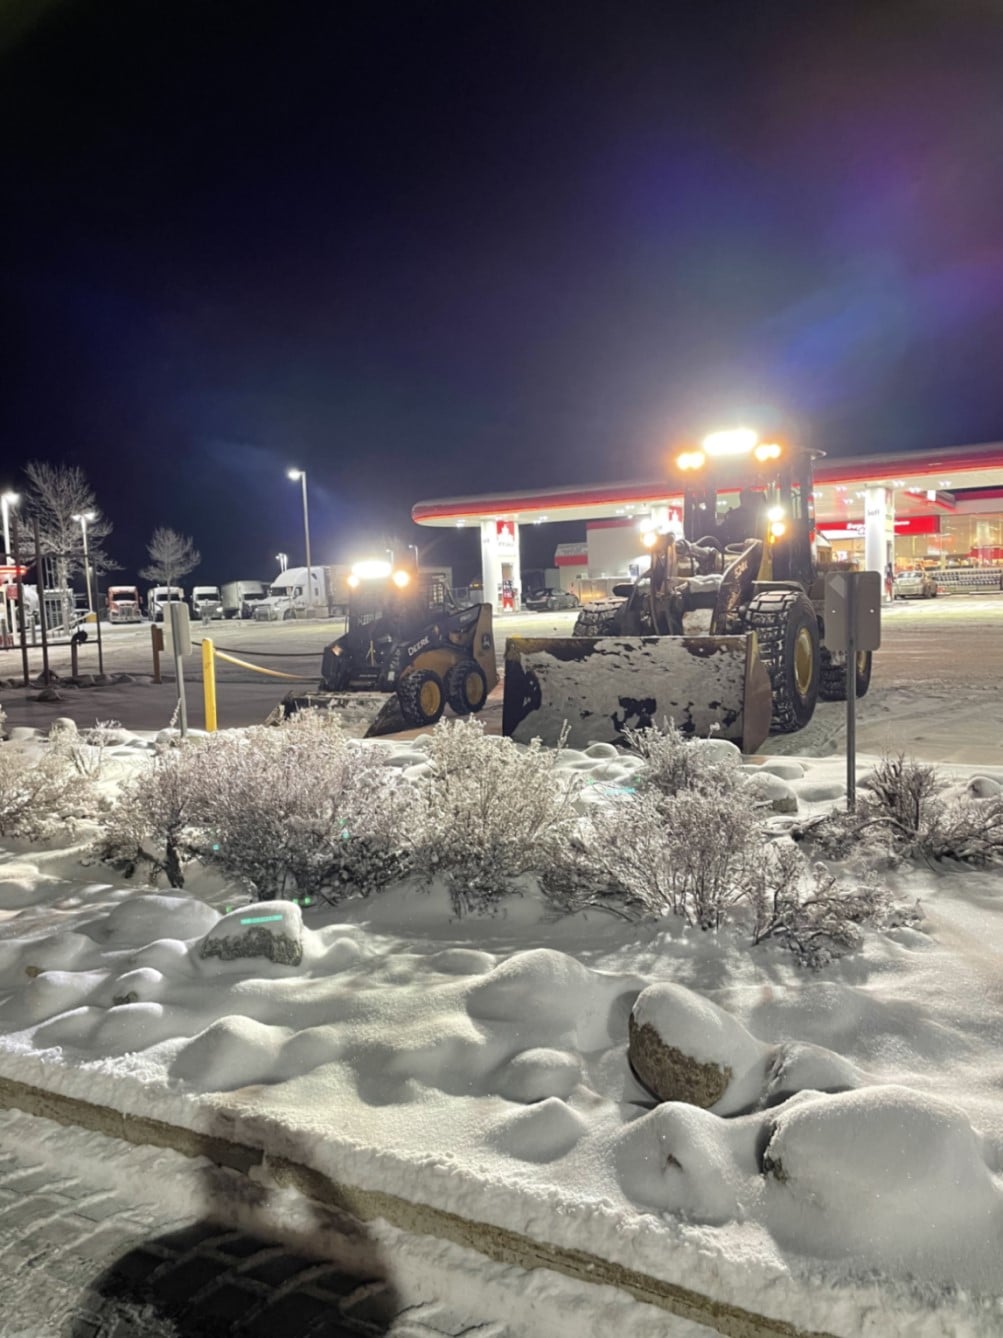 Two snow removal vehicles on the gas station